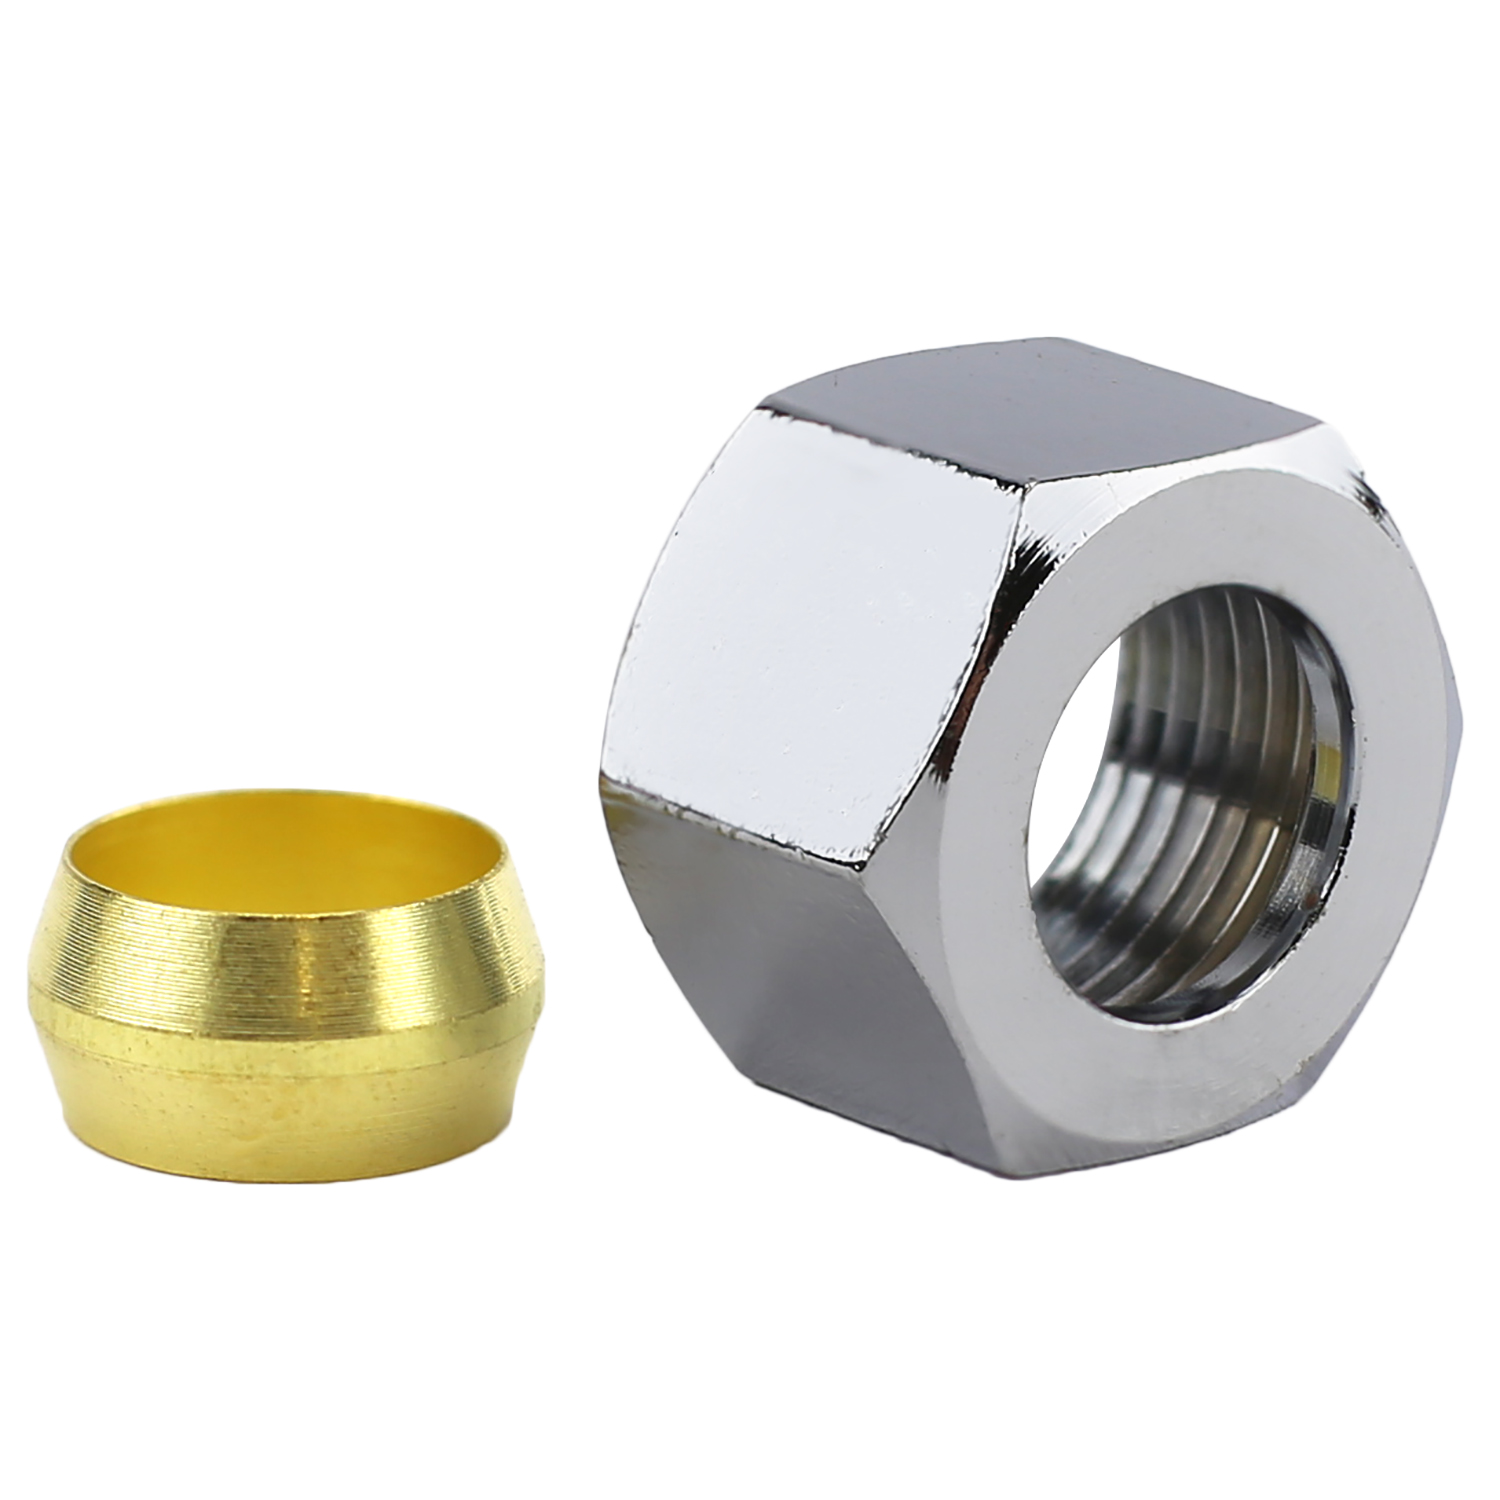 Lasco 17-6135 Nut and Sleeve, 3/8 in, Compression, Brass, Chrome